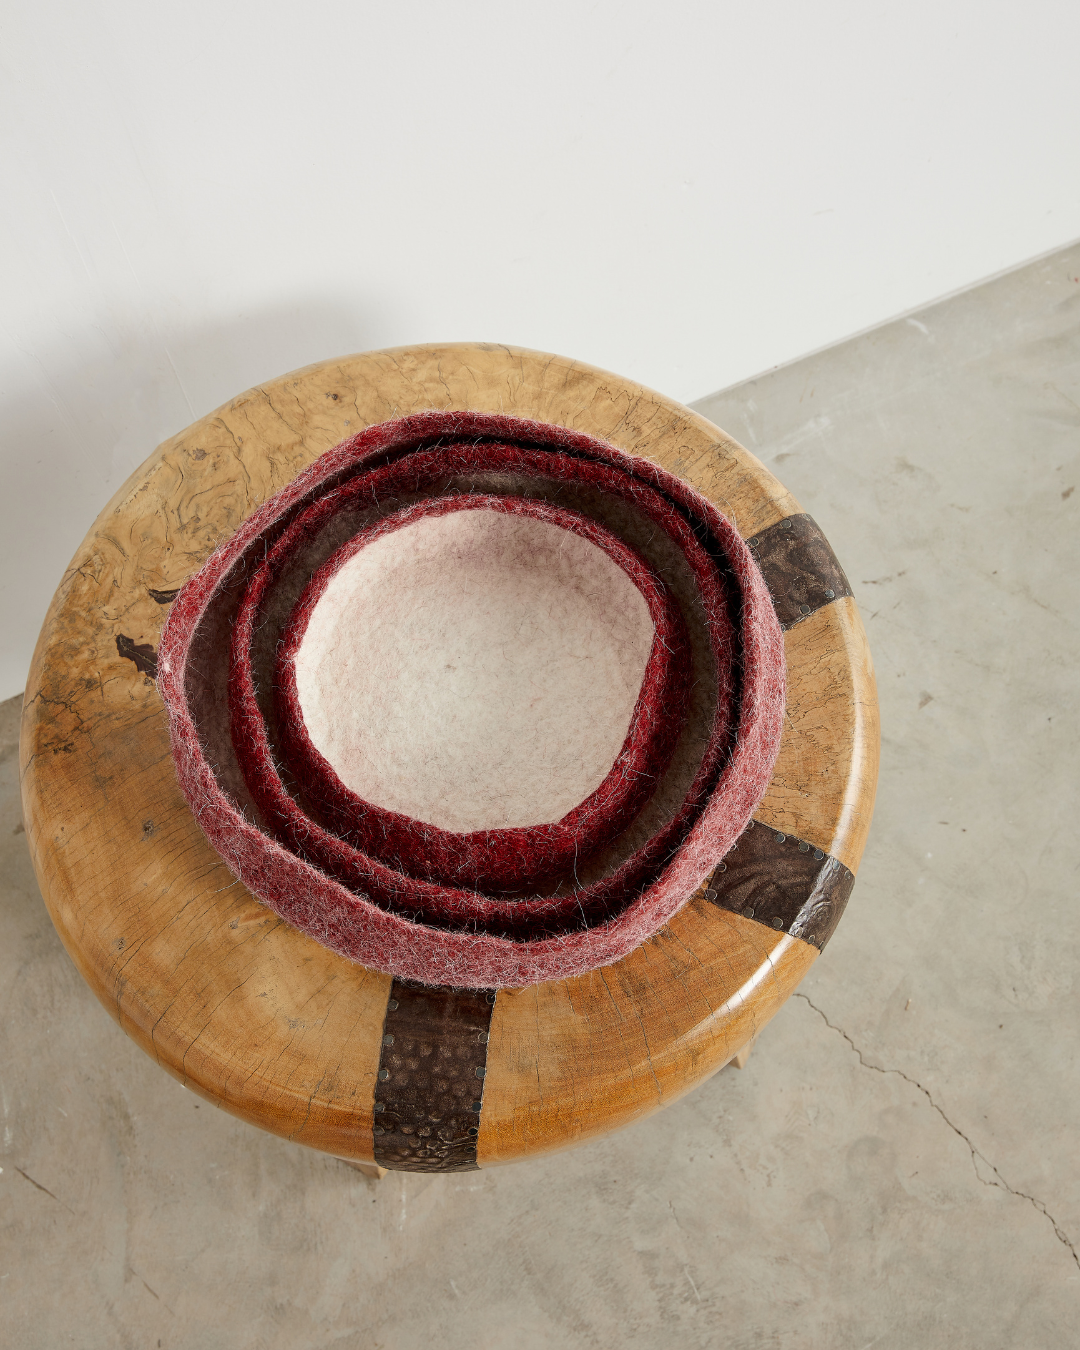 African Modern Wool Boho Bowls: Berry Red Hand Felted Nesting Bowls